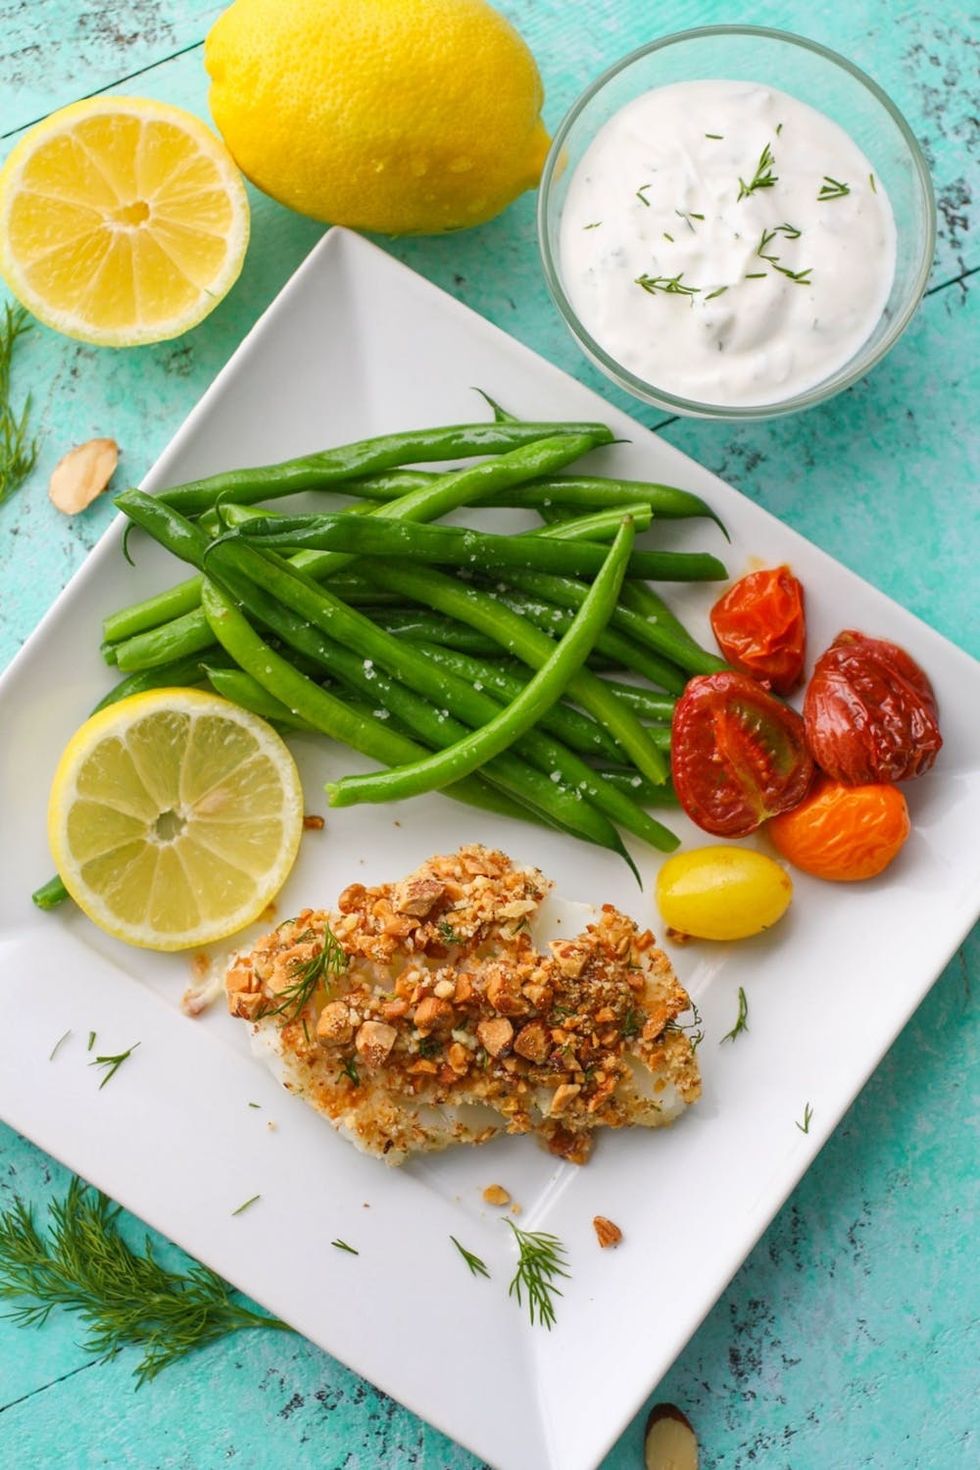 Baked Almond-Crusted Cod Recipe